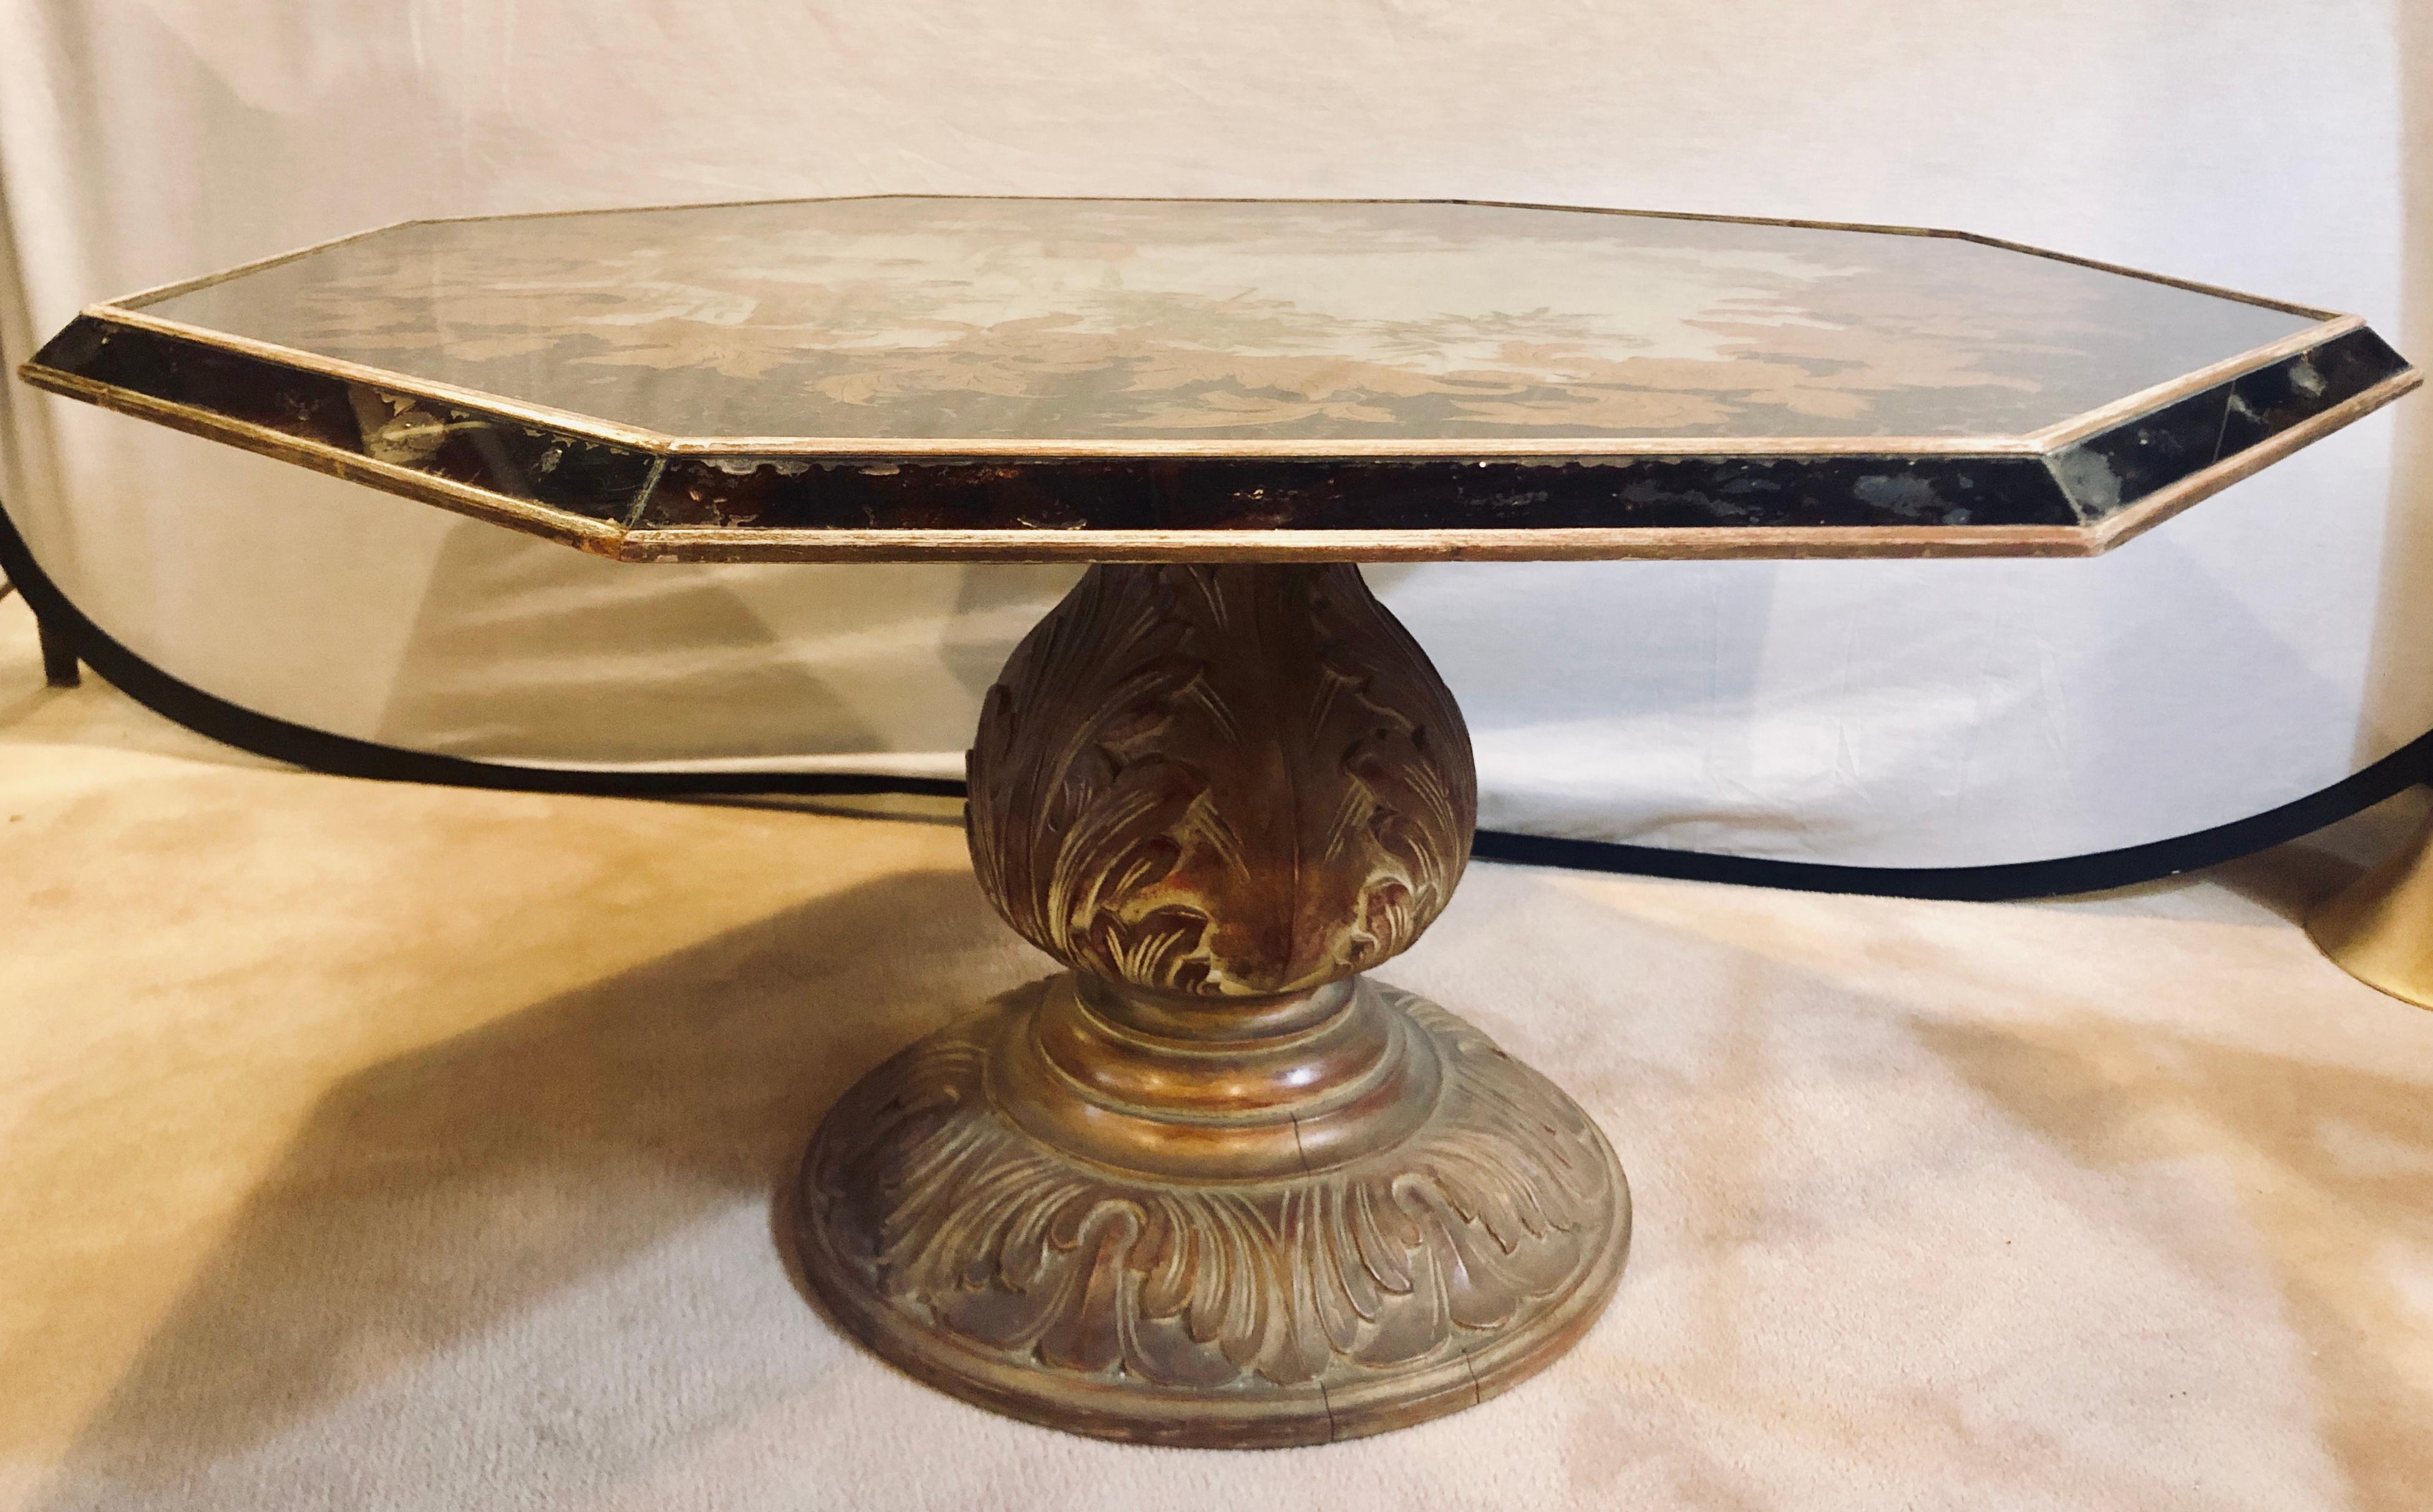 Octagon chinoiserie decorated mirror top low coffee table with carved wood base.